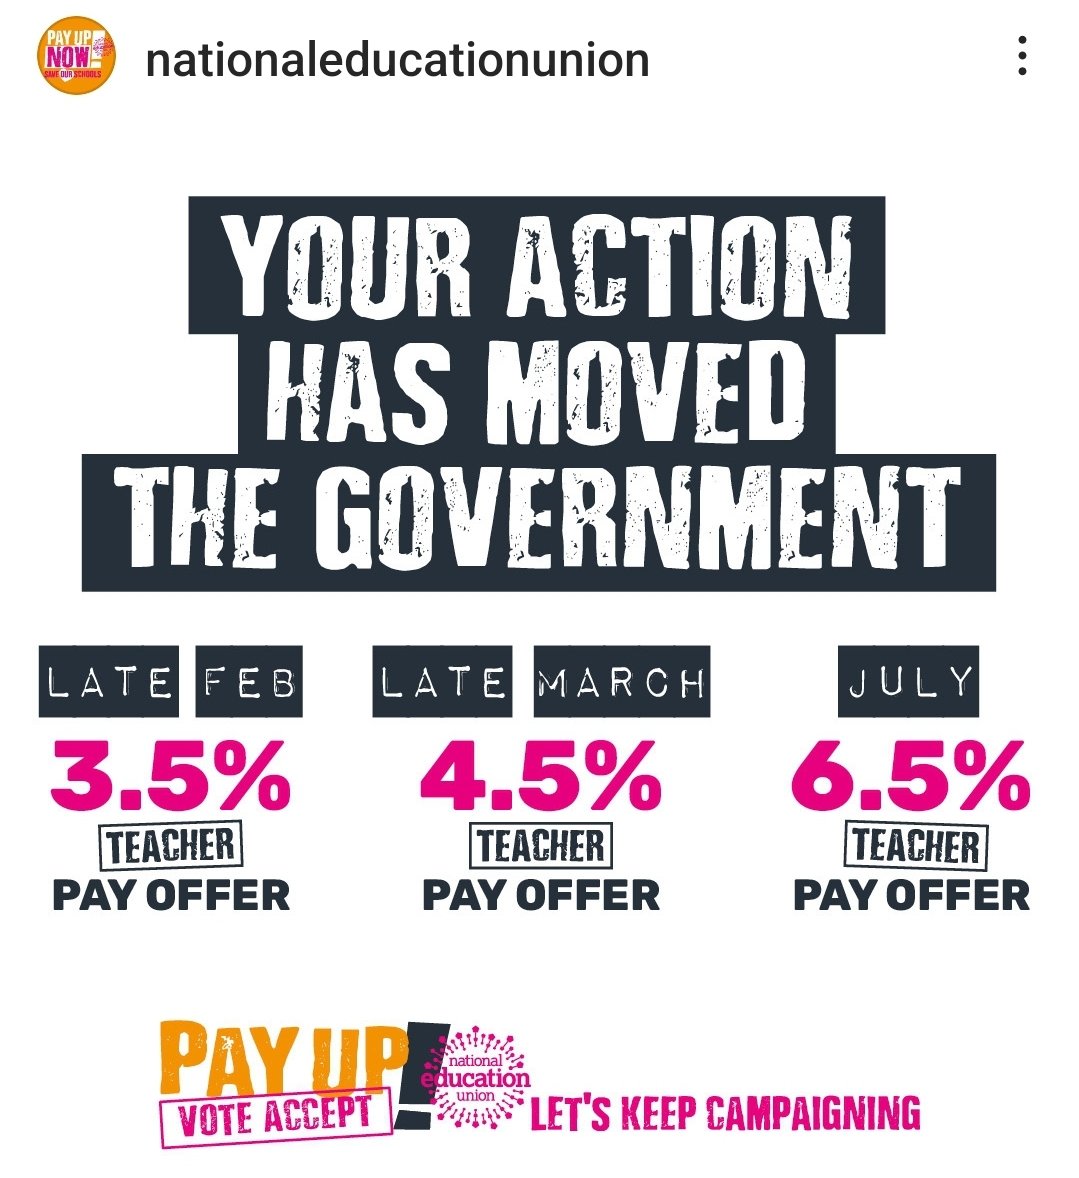 Schroedinger's strikes - our action so far has moved the government to 6.5% but further, more serious, action won't make them budge so we must accept the offer 🤷#payup #EducatorsSayNo